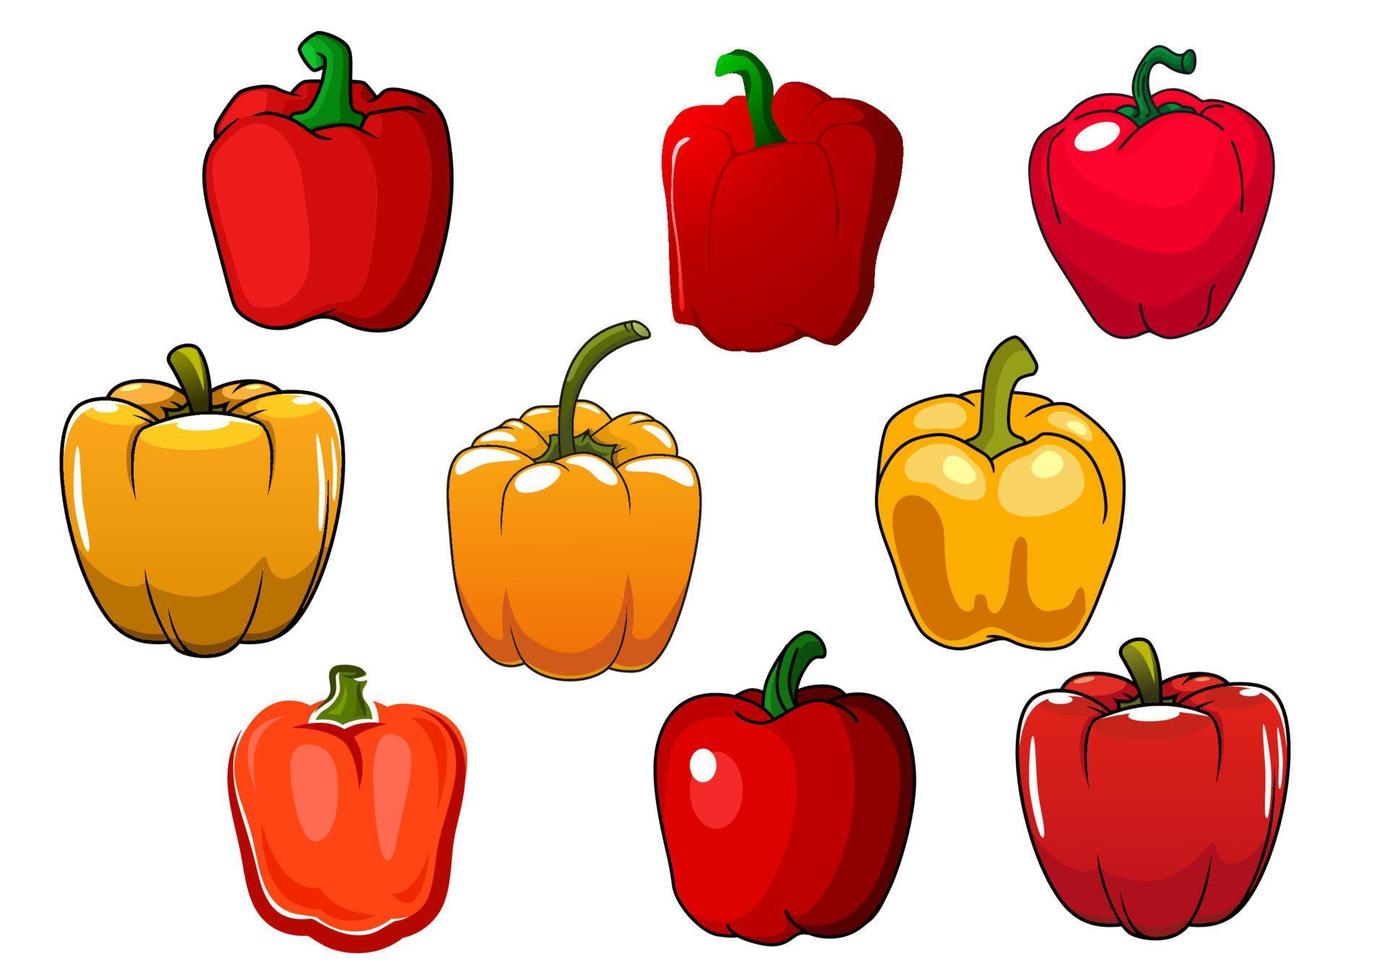 Red and yellow bell peppers vegetables vector